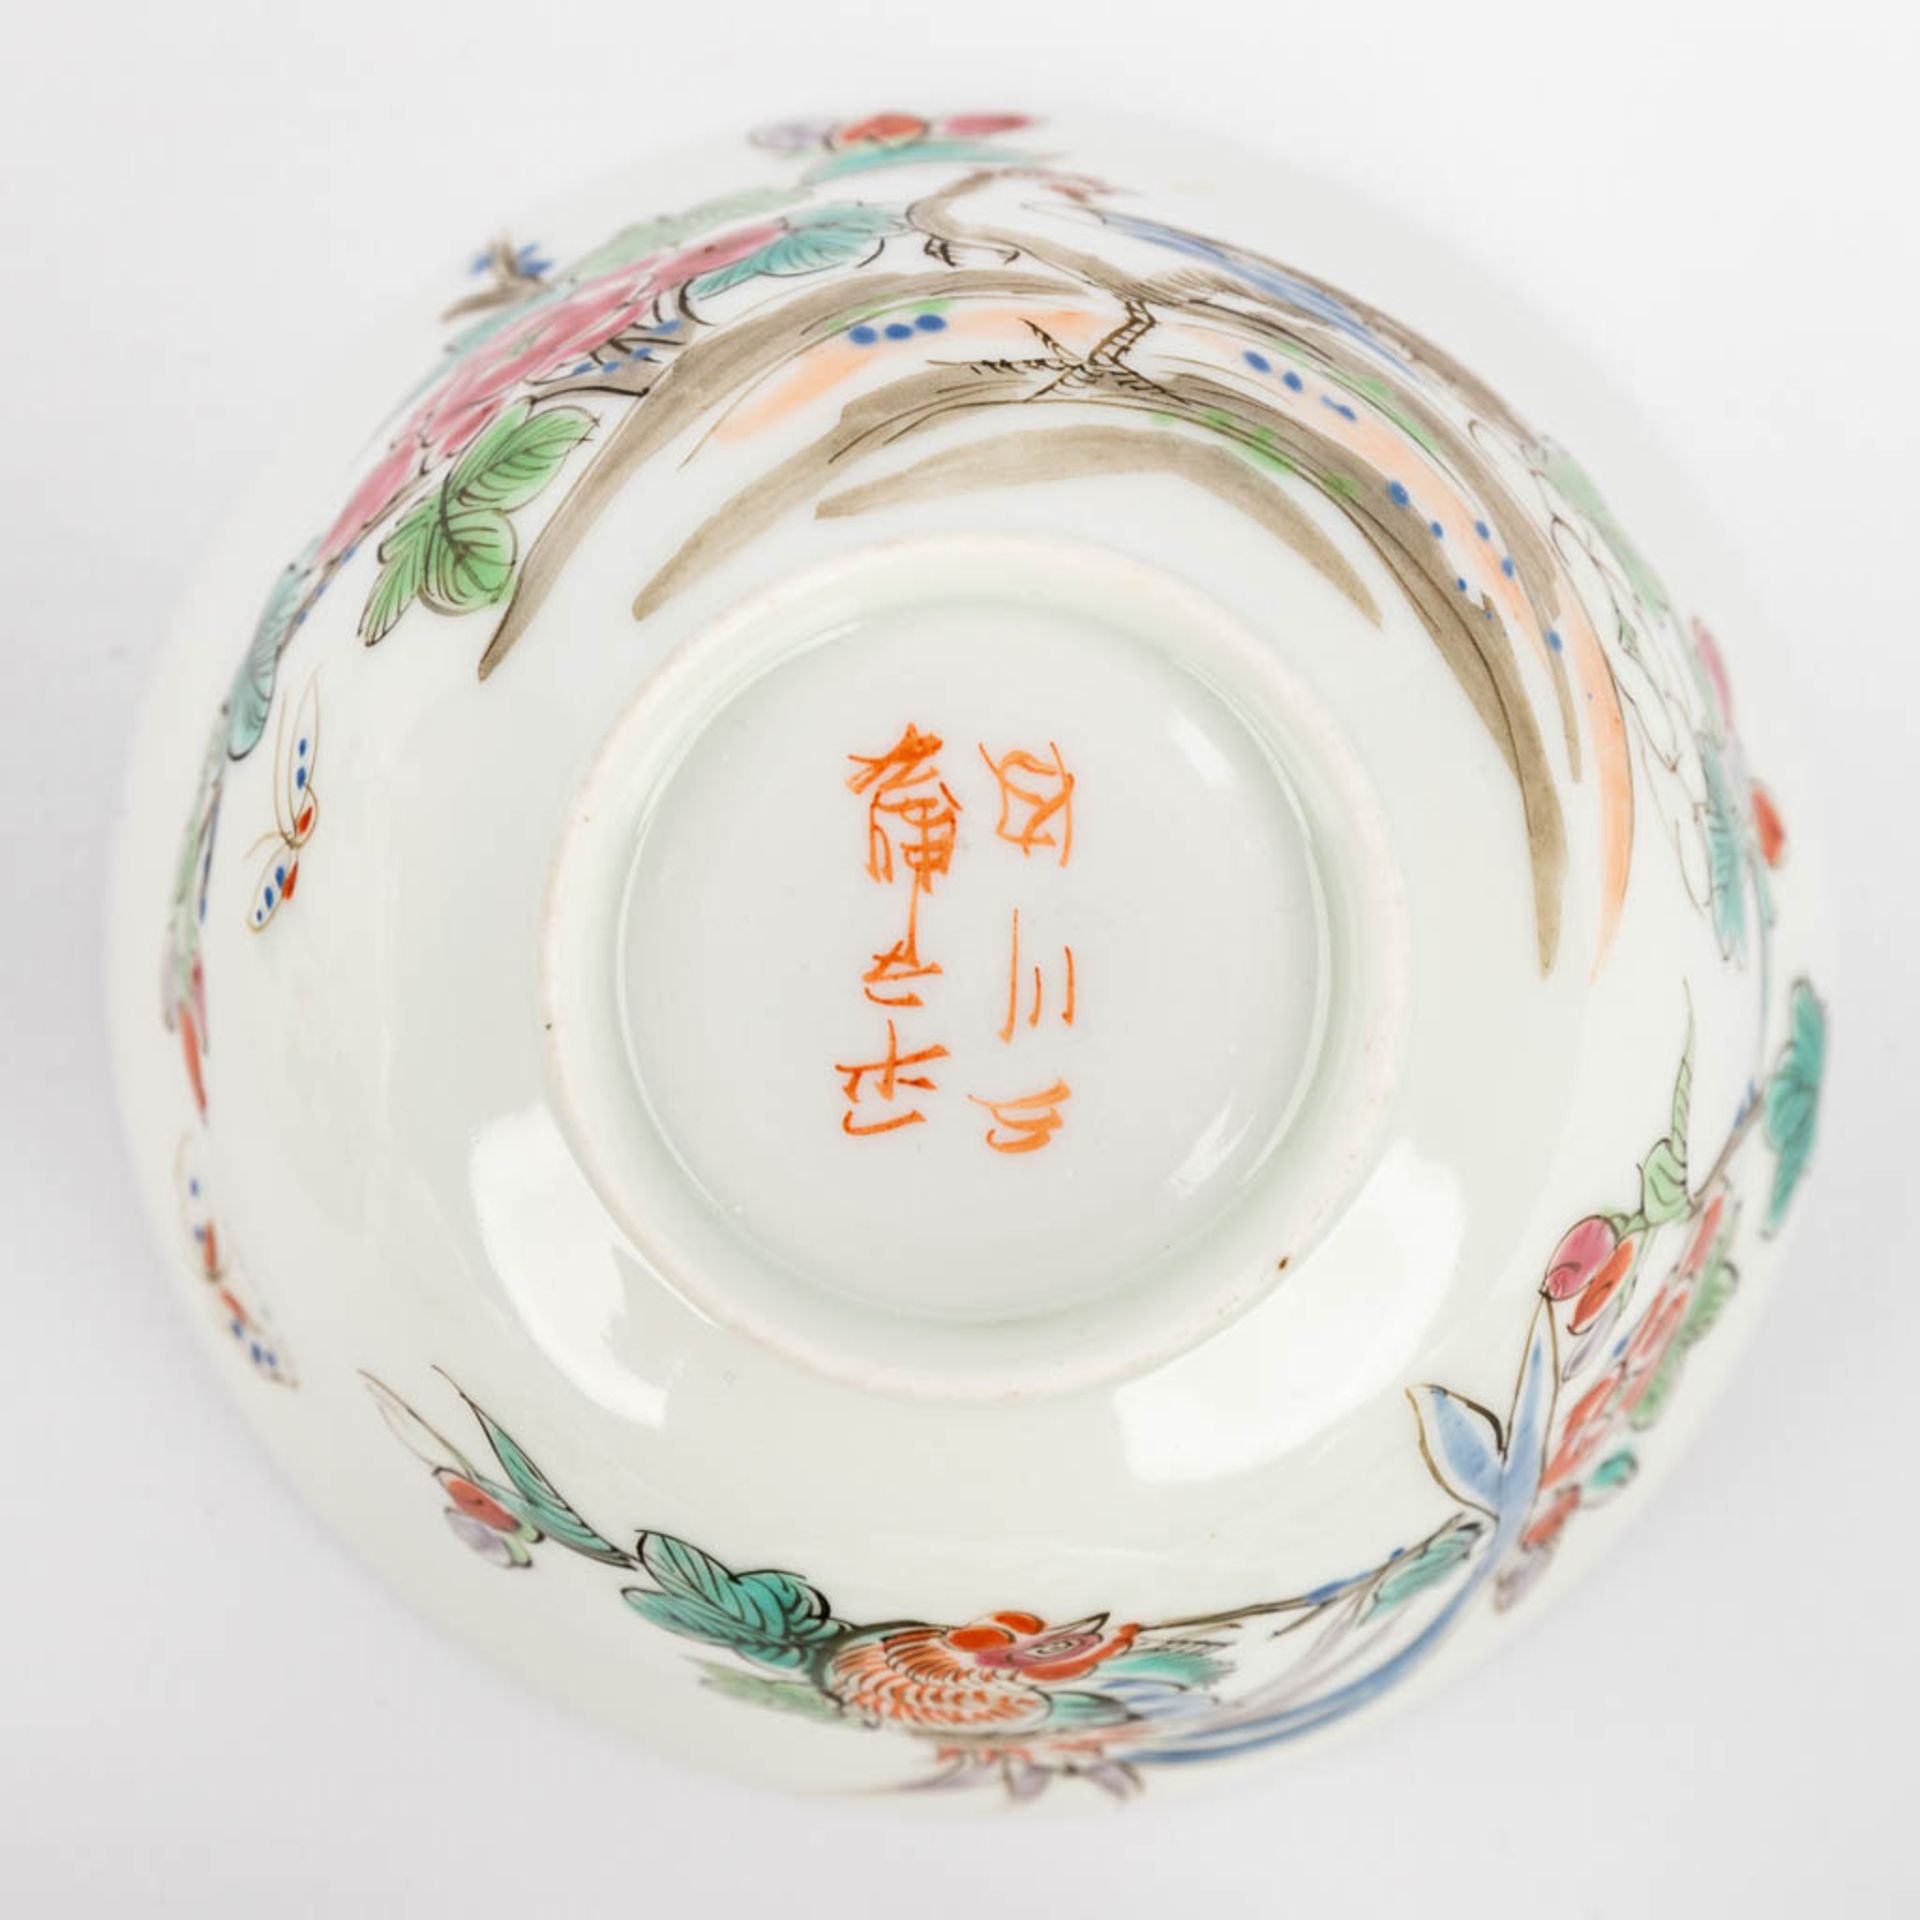 A large collection of bowls and saucers, eggshell porcelain, Japan, 20th C. (H:9 x D:9 cm) - Image 5 of 24